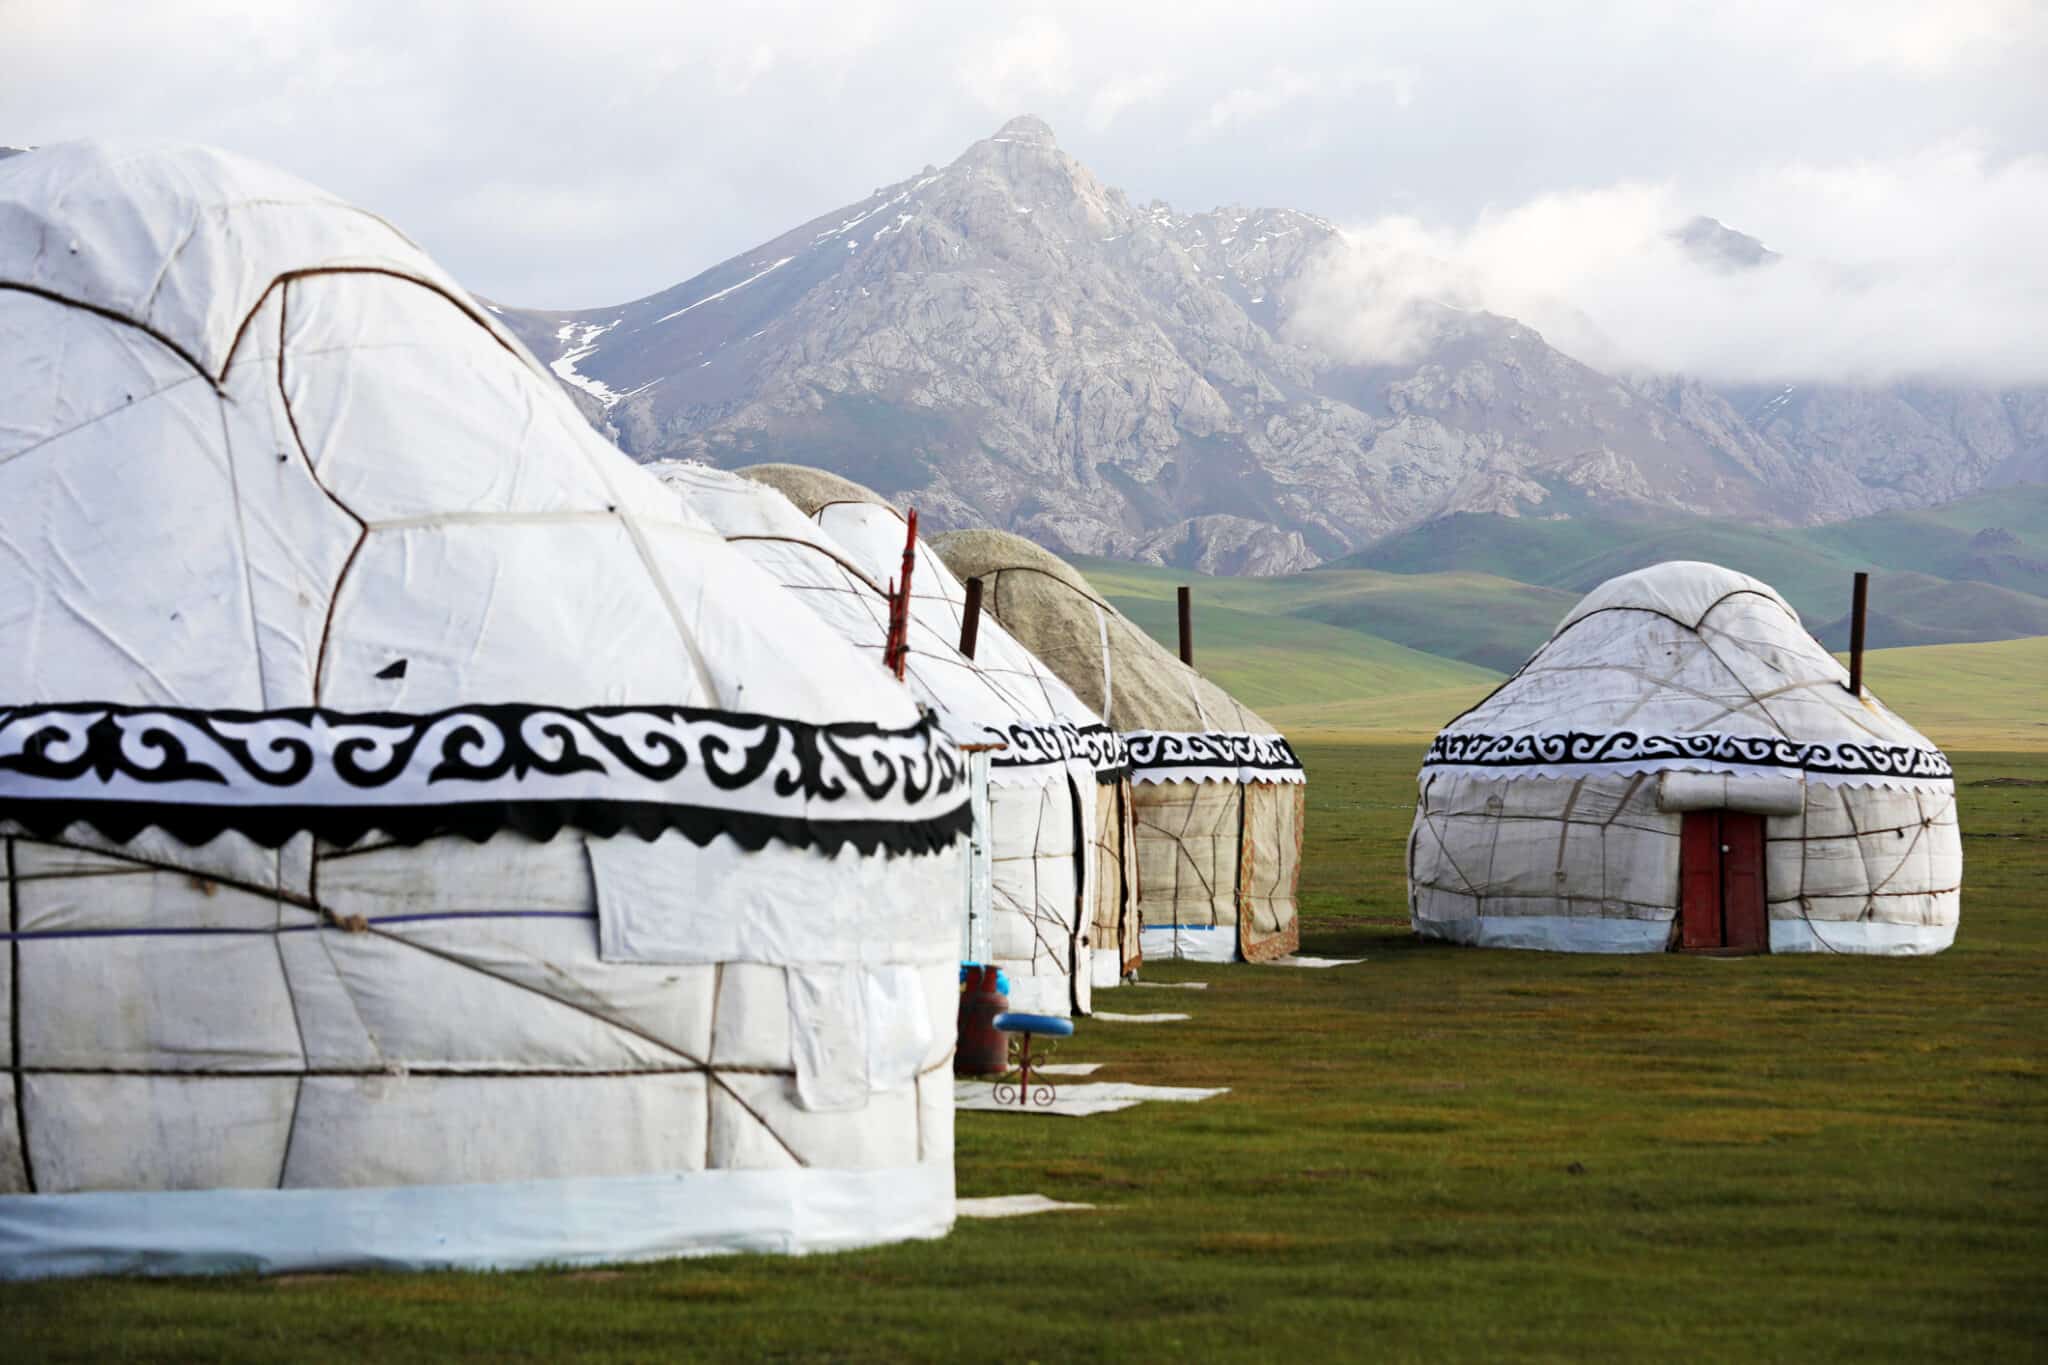 Dwellings in Traditional Funeral and Burial Rituals of the Kyrgyz People